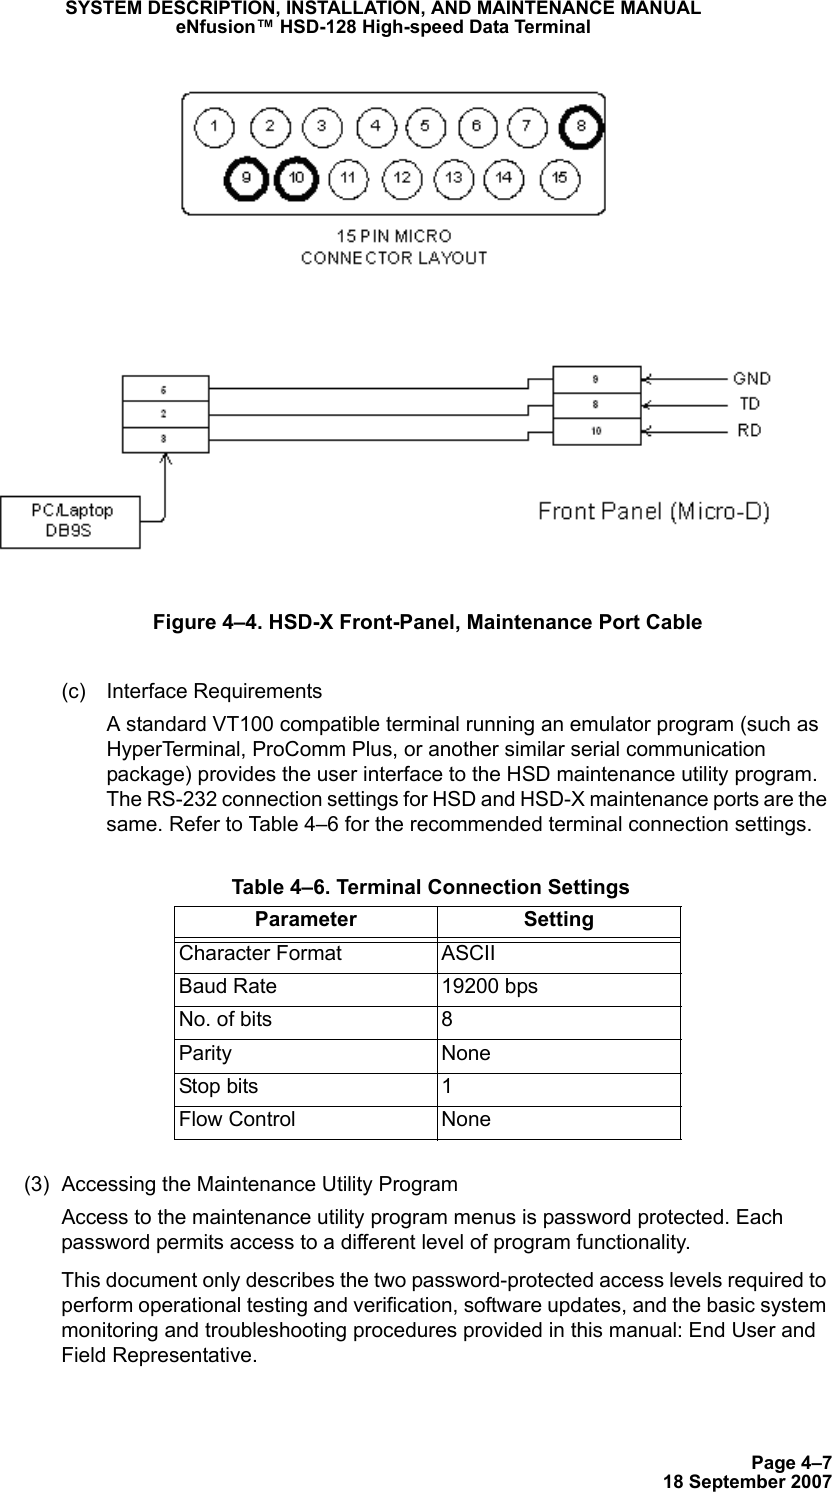 Page 4–718 September 2007SYSTEM DESCRIPTION, INSTALLATION, AND MAINTENANCE MANUALeNfusion™ HSD-128 High-speed Data TerminalFigure 4–4. HSD-X Front-Panel, Maintenance Port Cable (c) Interface RequirementsA standard VT100 compatible terminal running an emulator program (such as HyperTerminal, ProComm Plus, or another similar serial communication package) provides the user interface to the HSD maintenance utility program. The RS-232 connection settings for HSD and HSD-X maintenance ports are the same. Refer to Table 4–6 for the recommended terminal connection settings.(3) Accessing the Maintenance Utility ProgramAccess to the maintenance utility program menus is password protected. Each password permits access to a different level of program functionality. This document only describes the two password-protected access levels required to perform operational testing and verification, software updates, and the basic system monitoring and troubleshooting procedures provided in this manual: End User and Field Representative.  Table 4–6. Terminal Connection SettingsParameter SettingCharacter Format ASCIIBaud Rate 19200 bpsNo. of bits 8Parity NoneStop bits 1Flow Control None